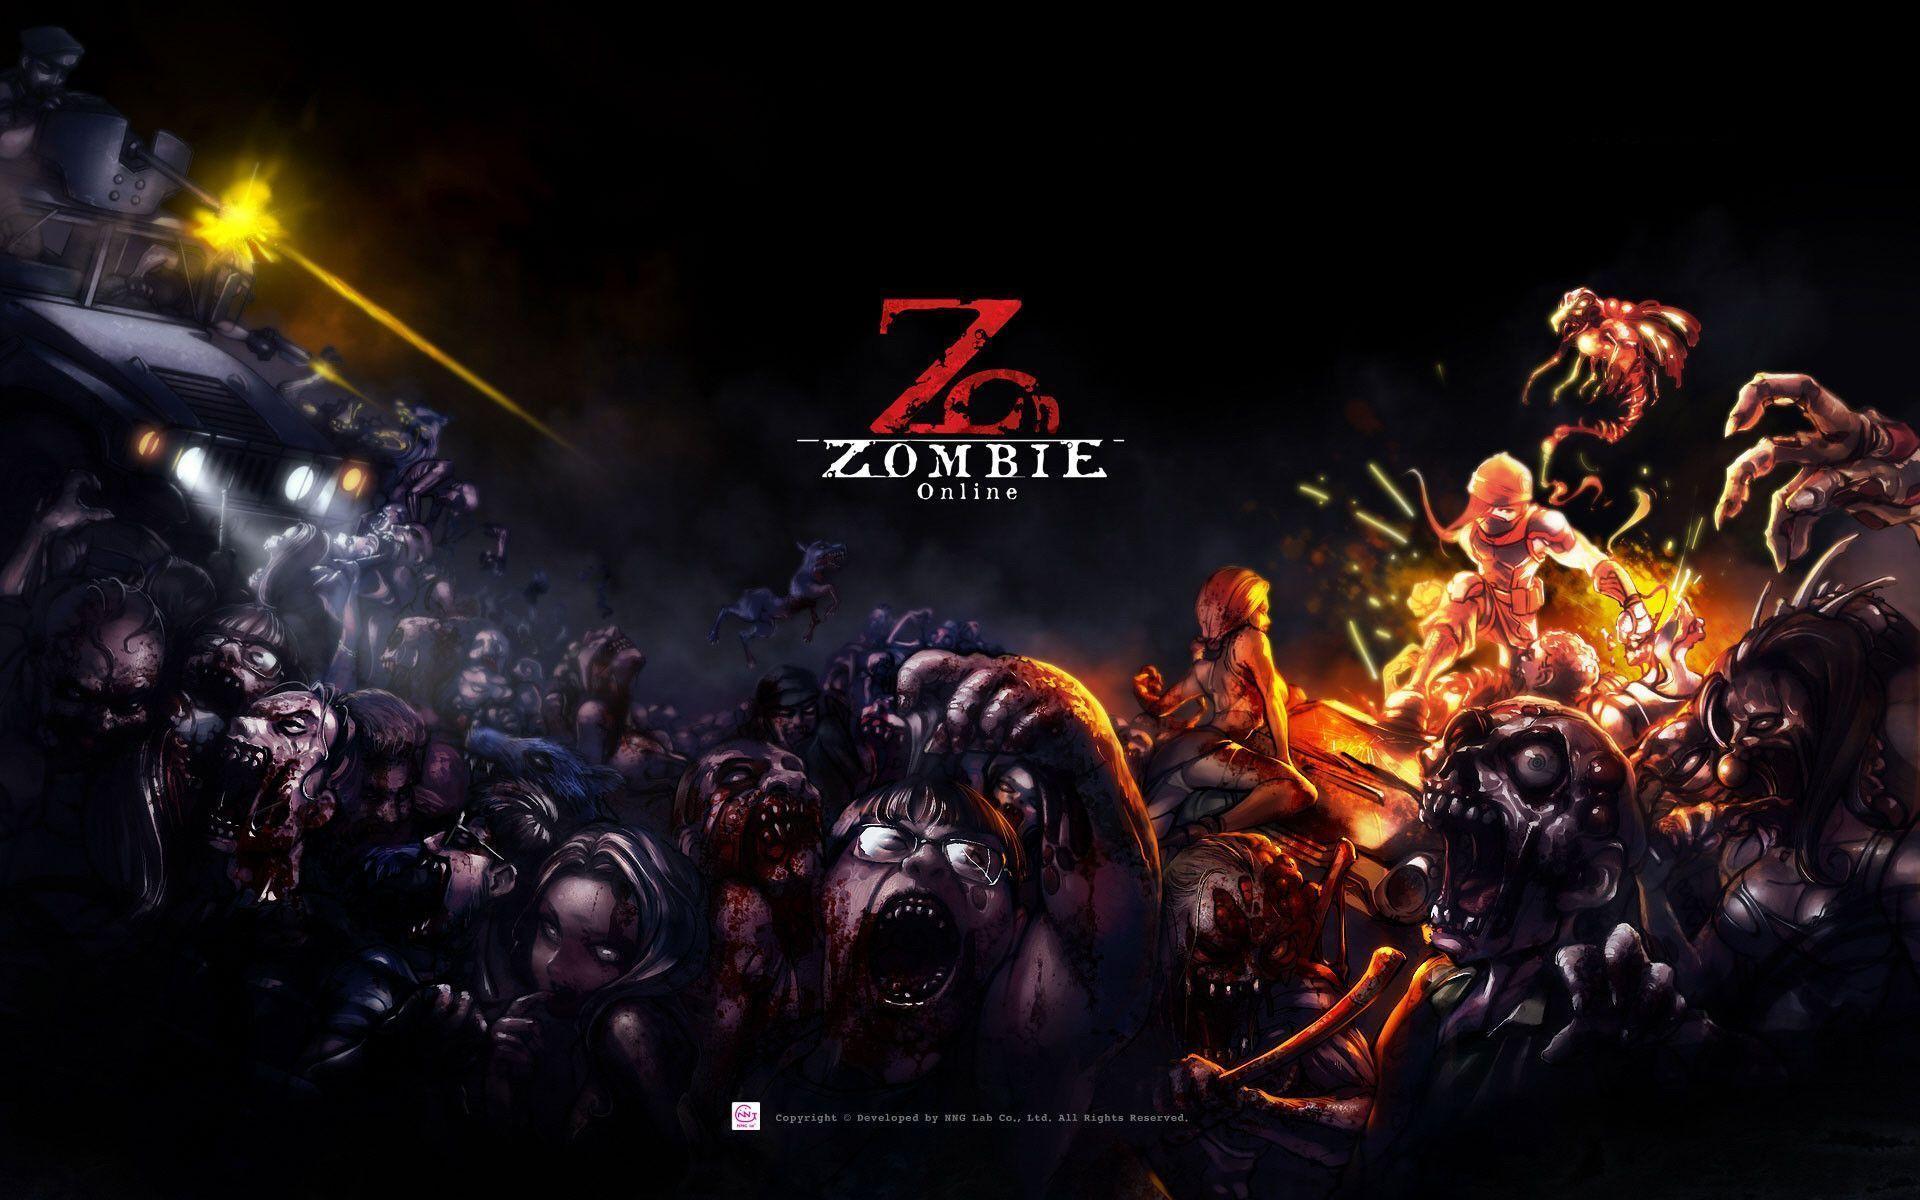 Zombie Online HD Widescreen Games Wallpaper. High Defenition